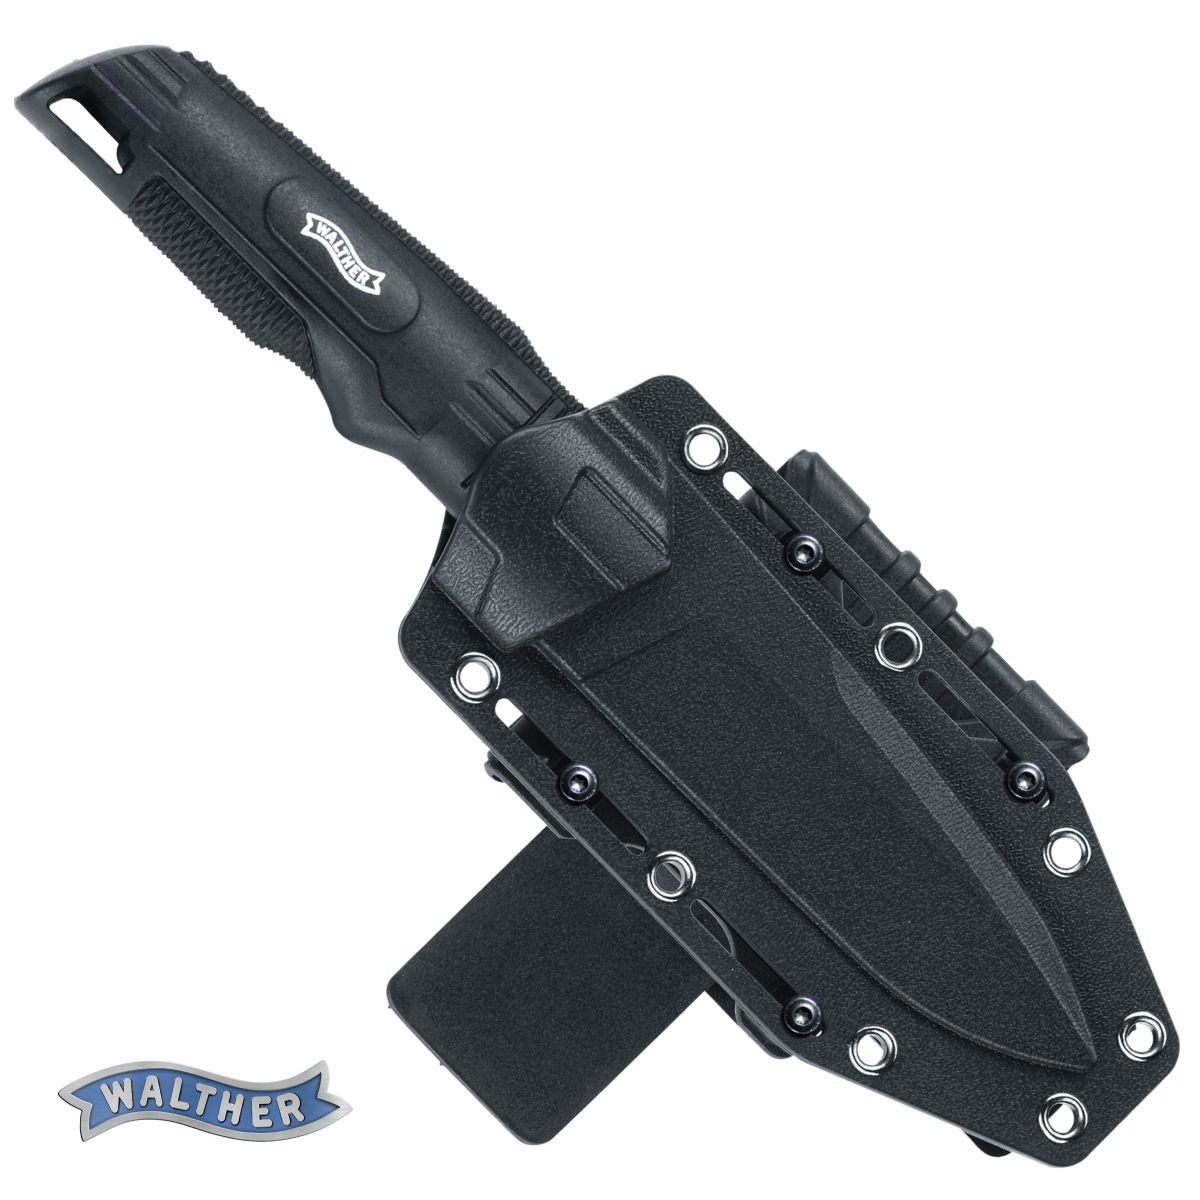 walther-back-up-knife-440c-5.0720_02